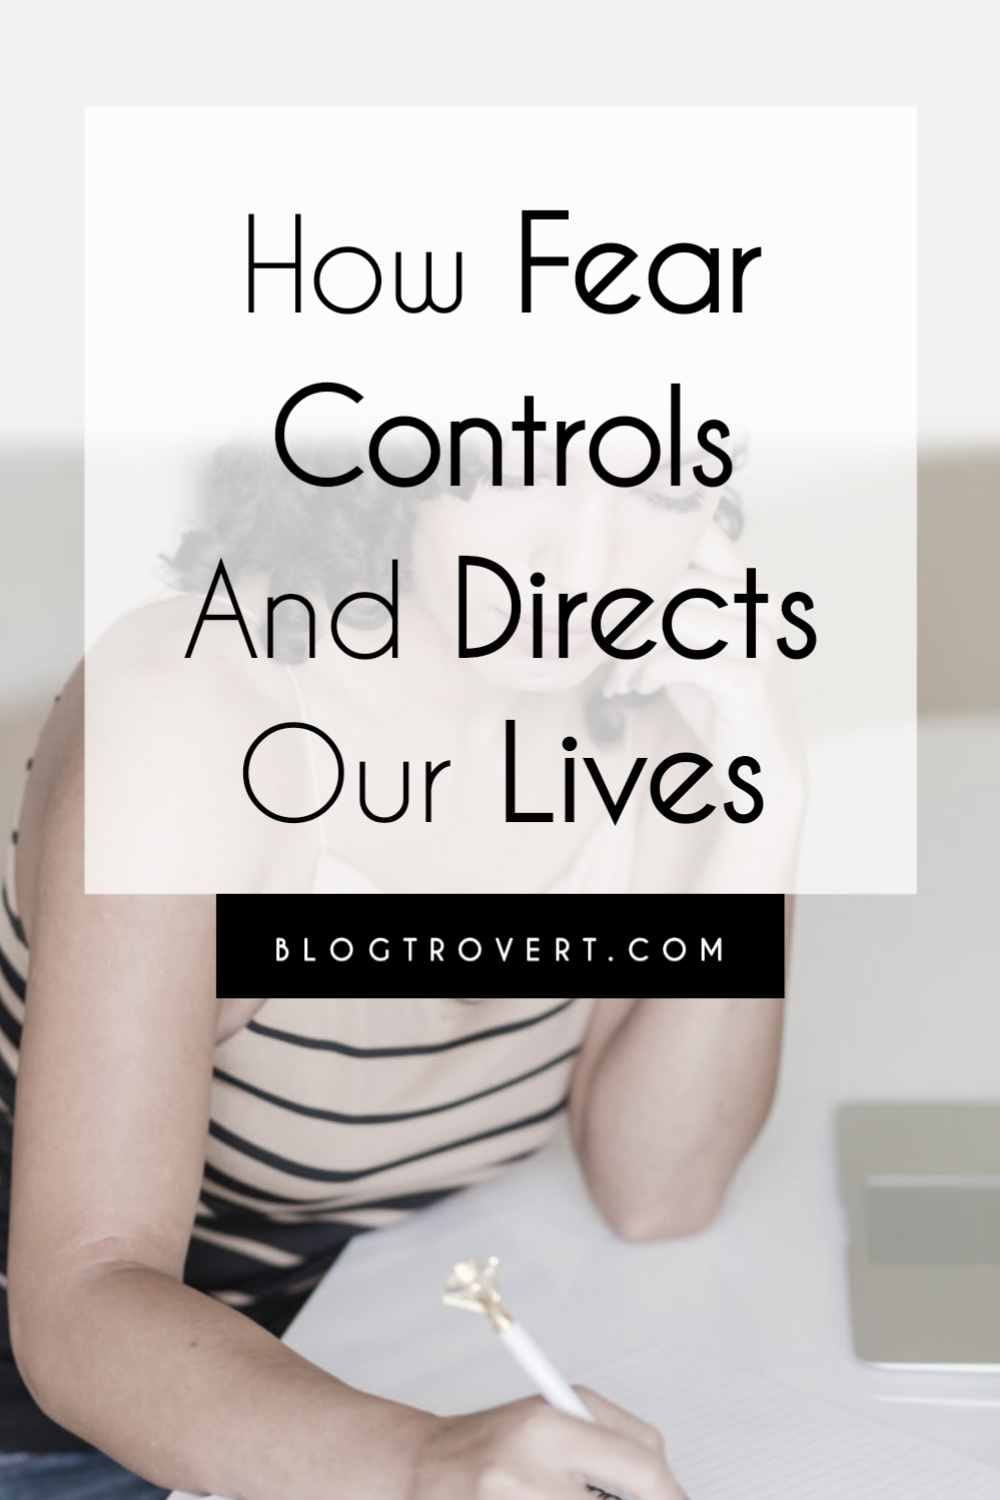 How fear controls us - Why we must take over 7